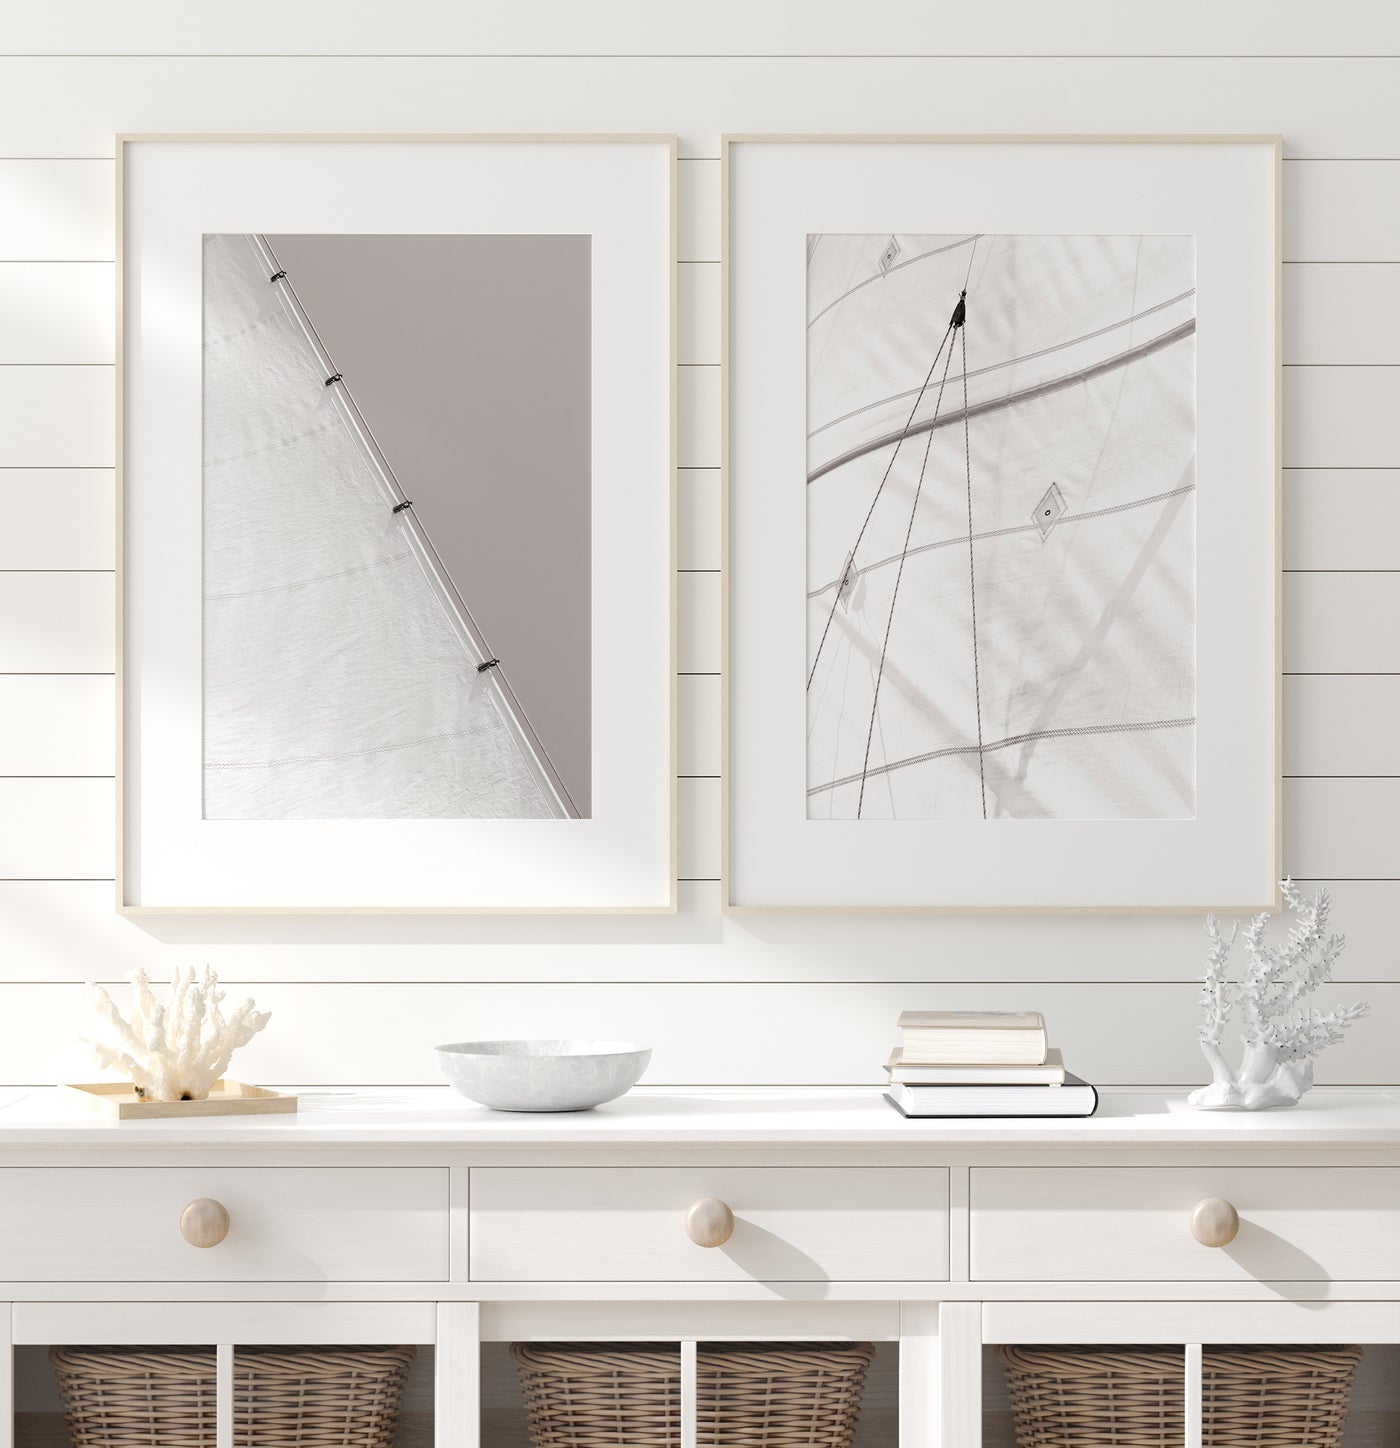 Sailing No 1 and 3 - Black and white photography art prints by Cattie Coyle on wall in beach house